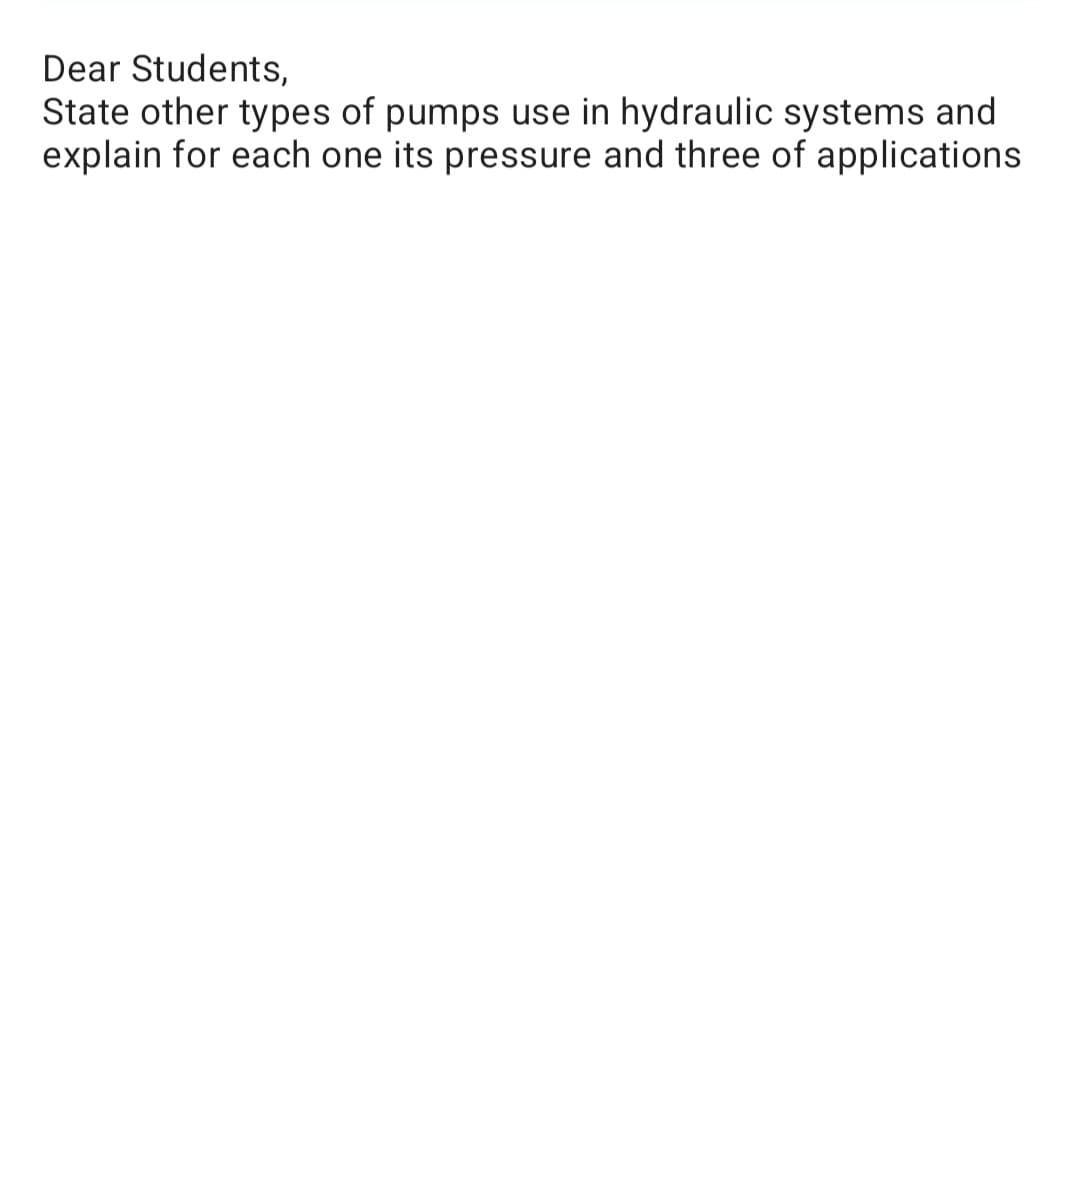 Dear Students,
State other types of pumps use in hydraulic systems and
explain for each one its pressure and three of applications
